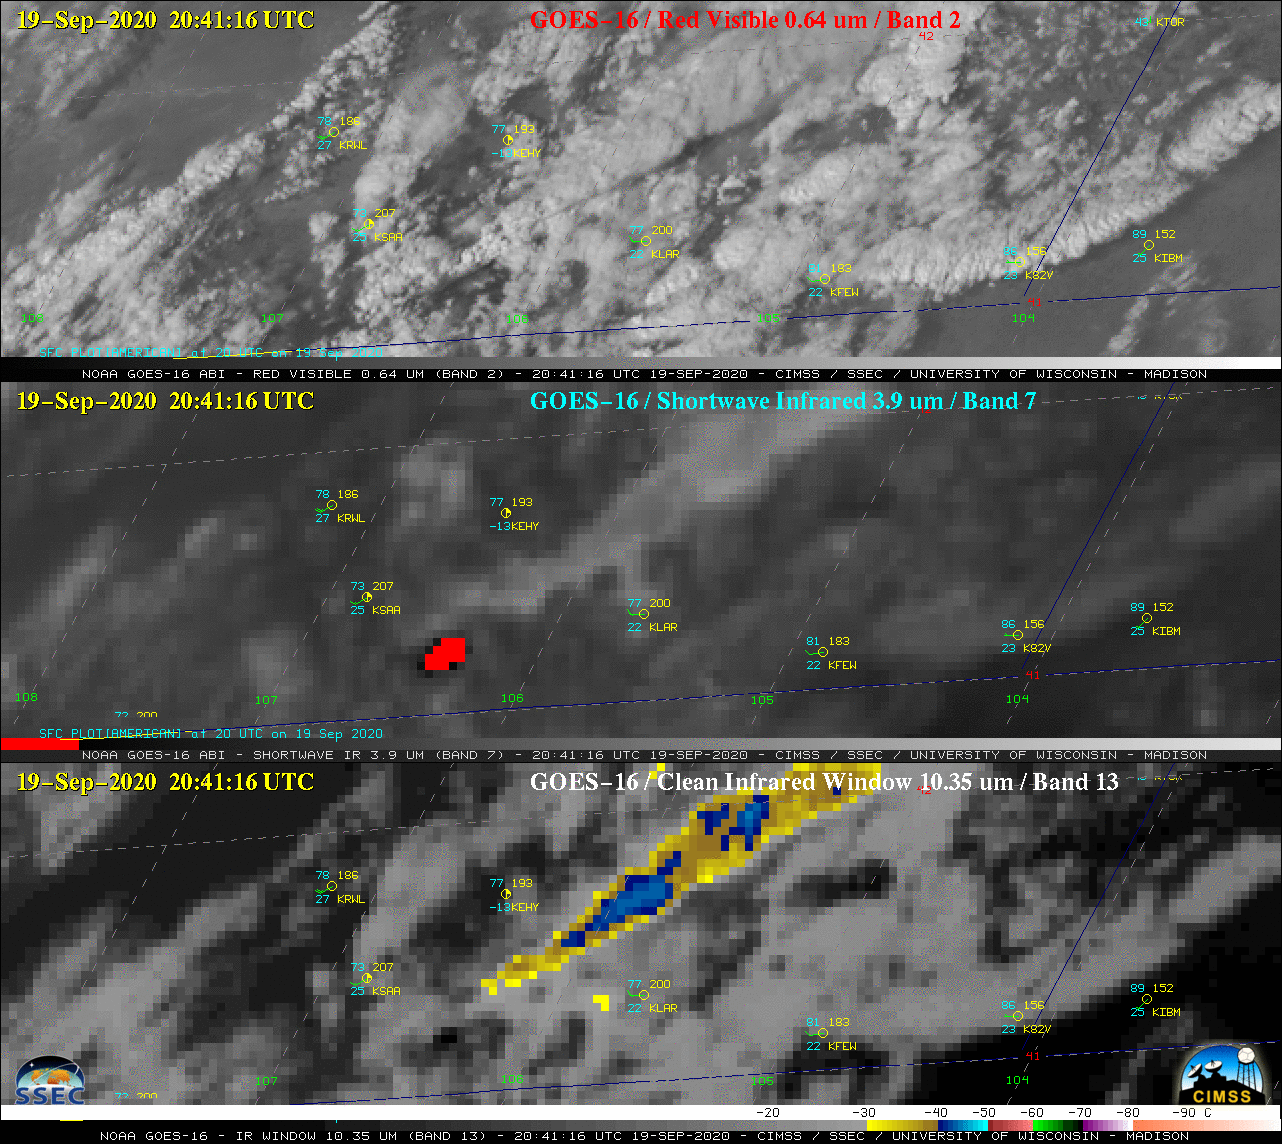 GOES-16 “Red” Visible (0.64 µm, top), Shortwave Infrared (3.9 µm, center) and “Clean” Infrared Window (10.35 µm, bottom) images, with hourly plots of surface reports [click to play animation | MP4]